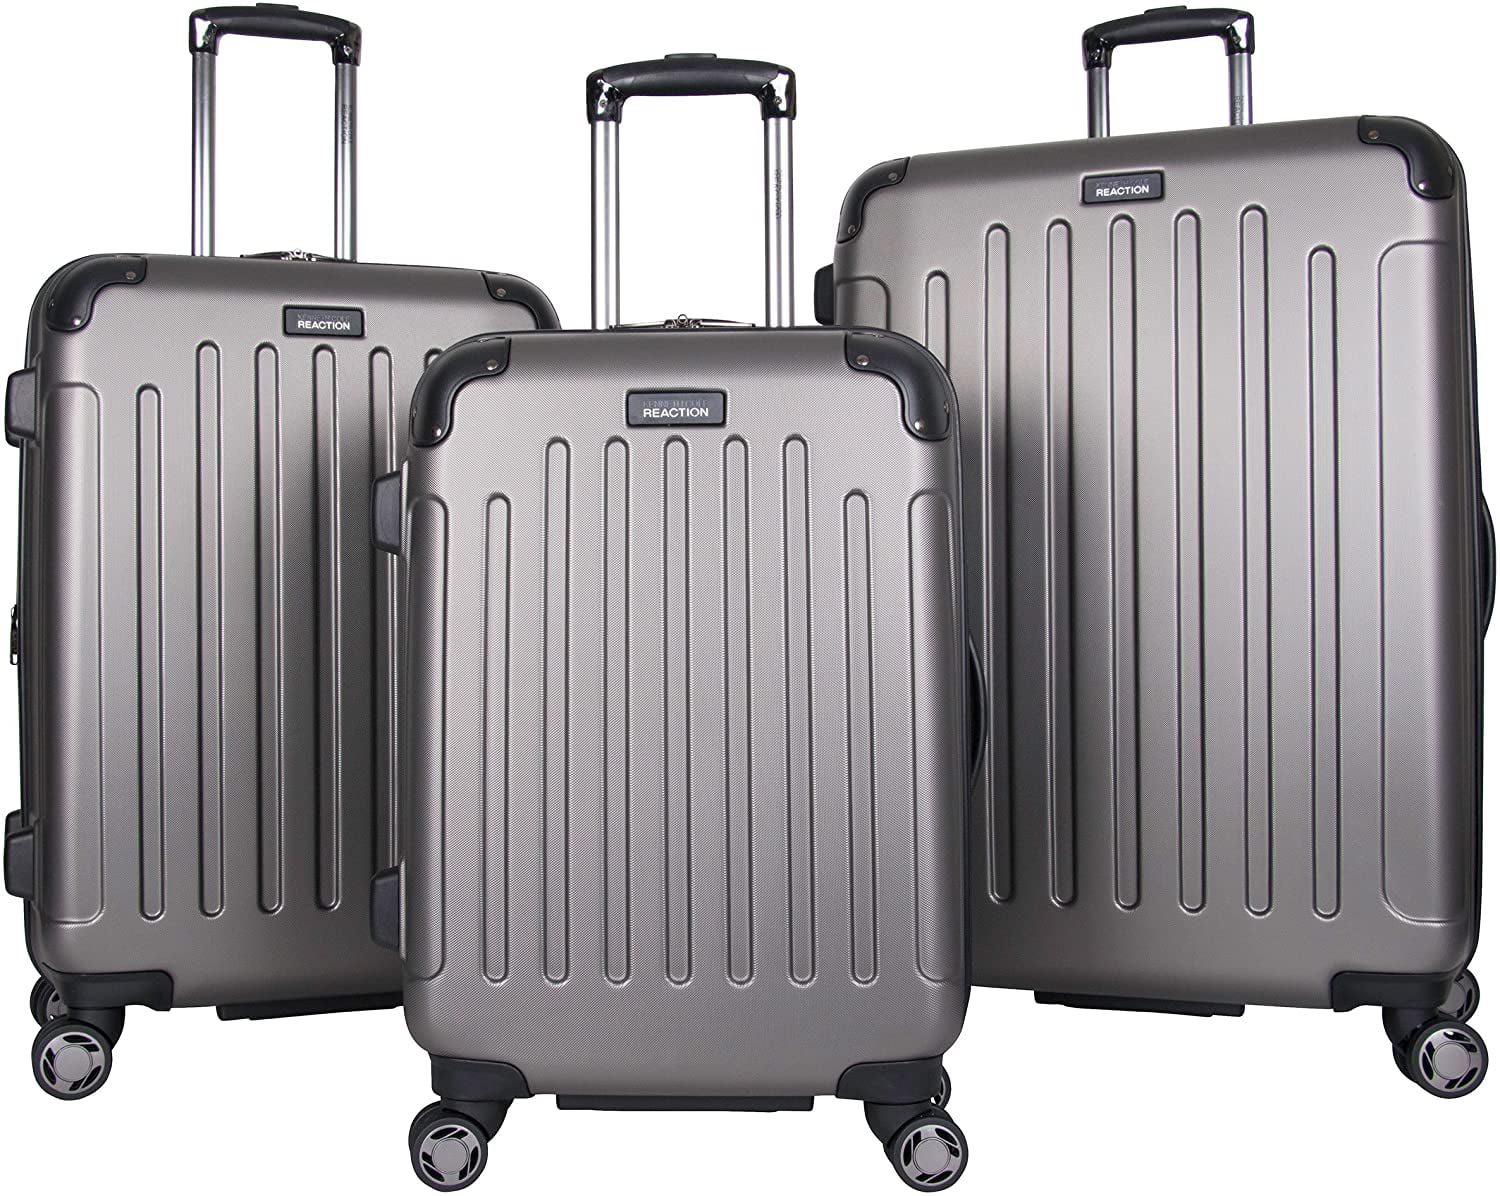 Kenneth Cole Reaction Renegade 24” Lightweight Hardside Expandable 8-Wheel Spinner Checked-Size Luggage Black 